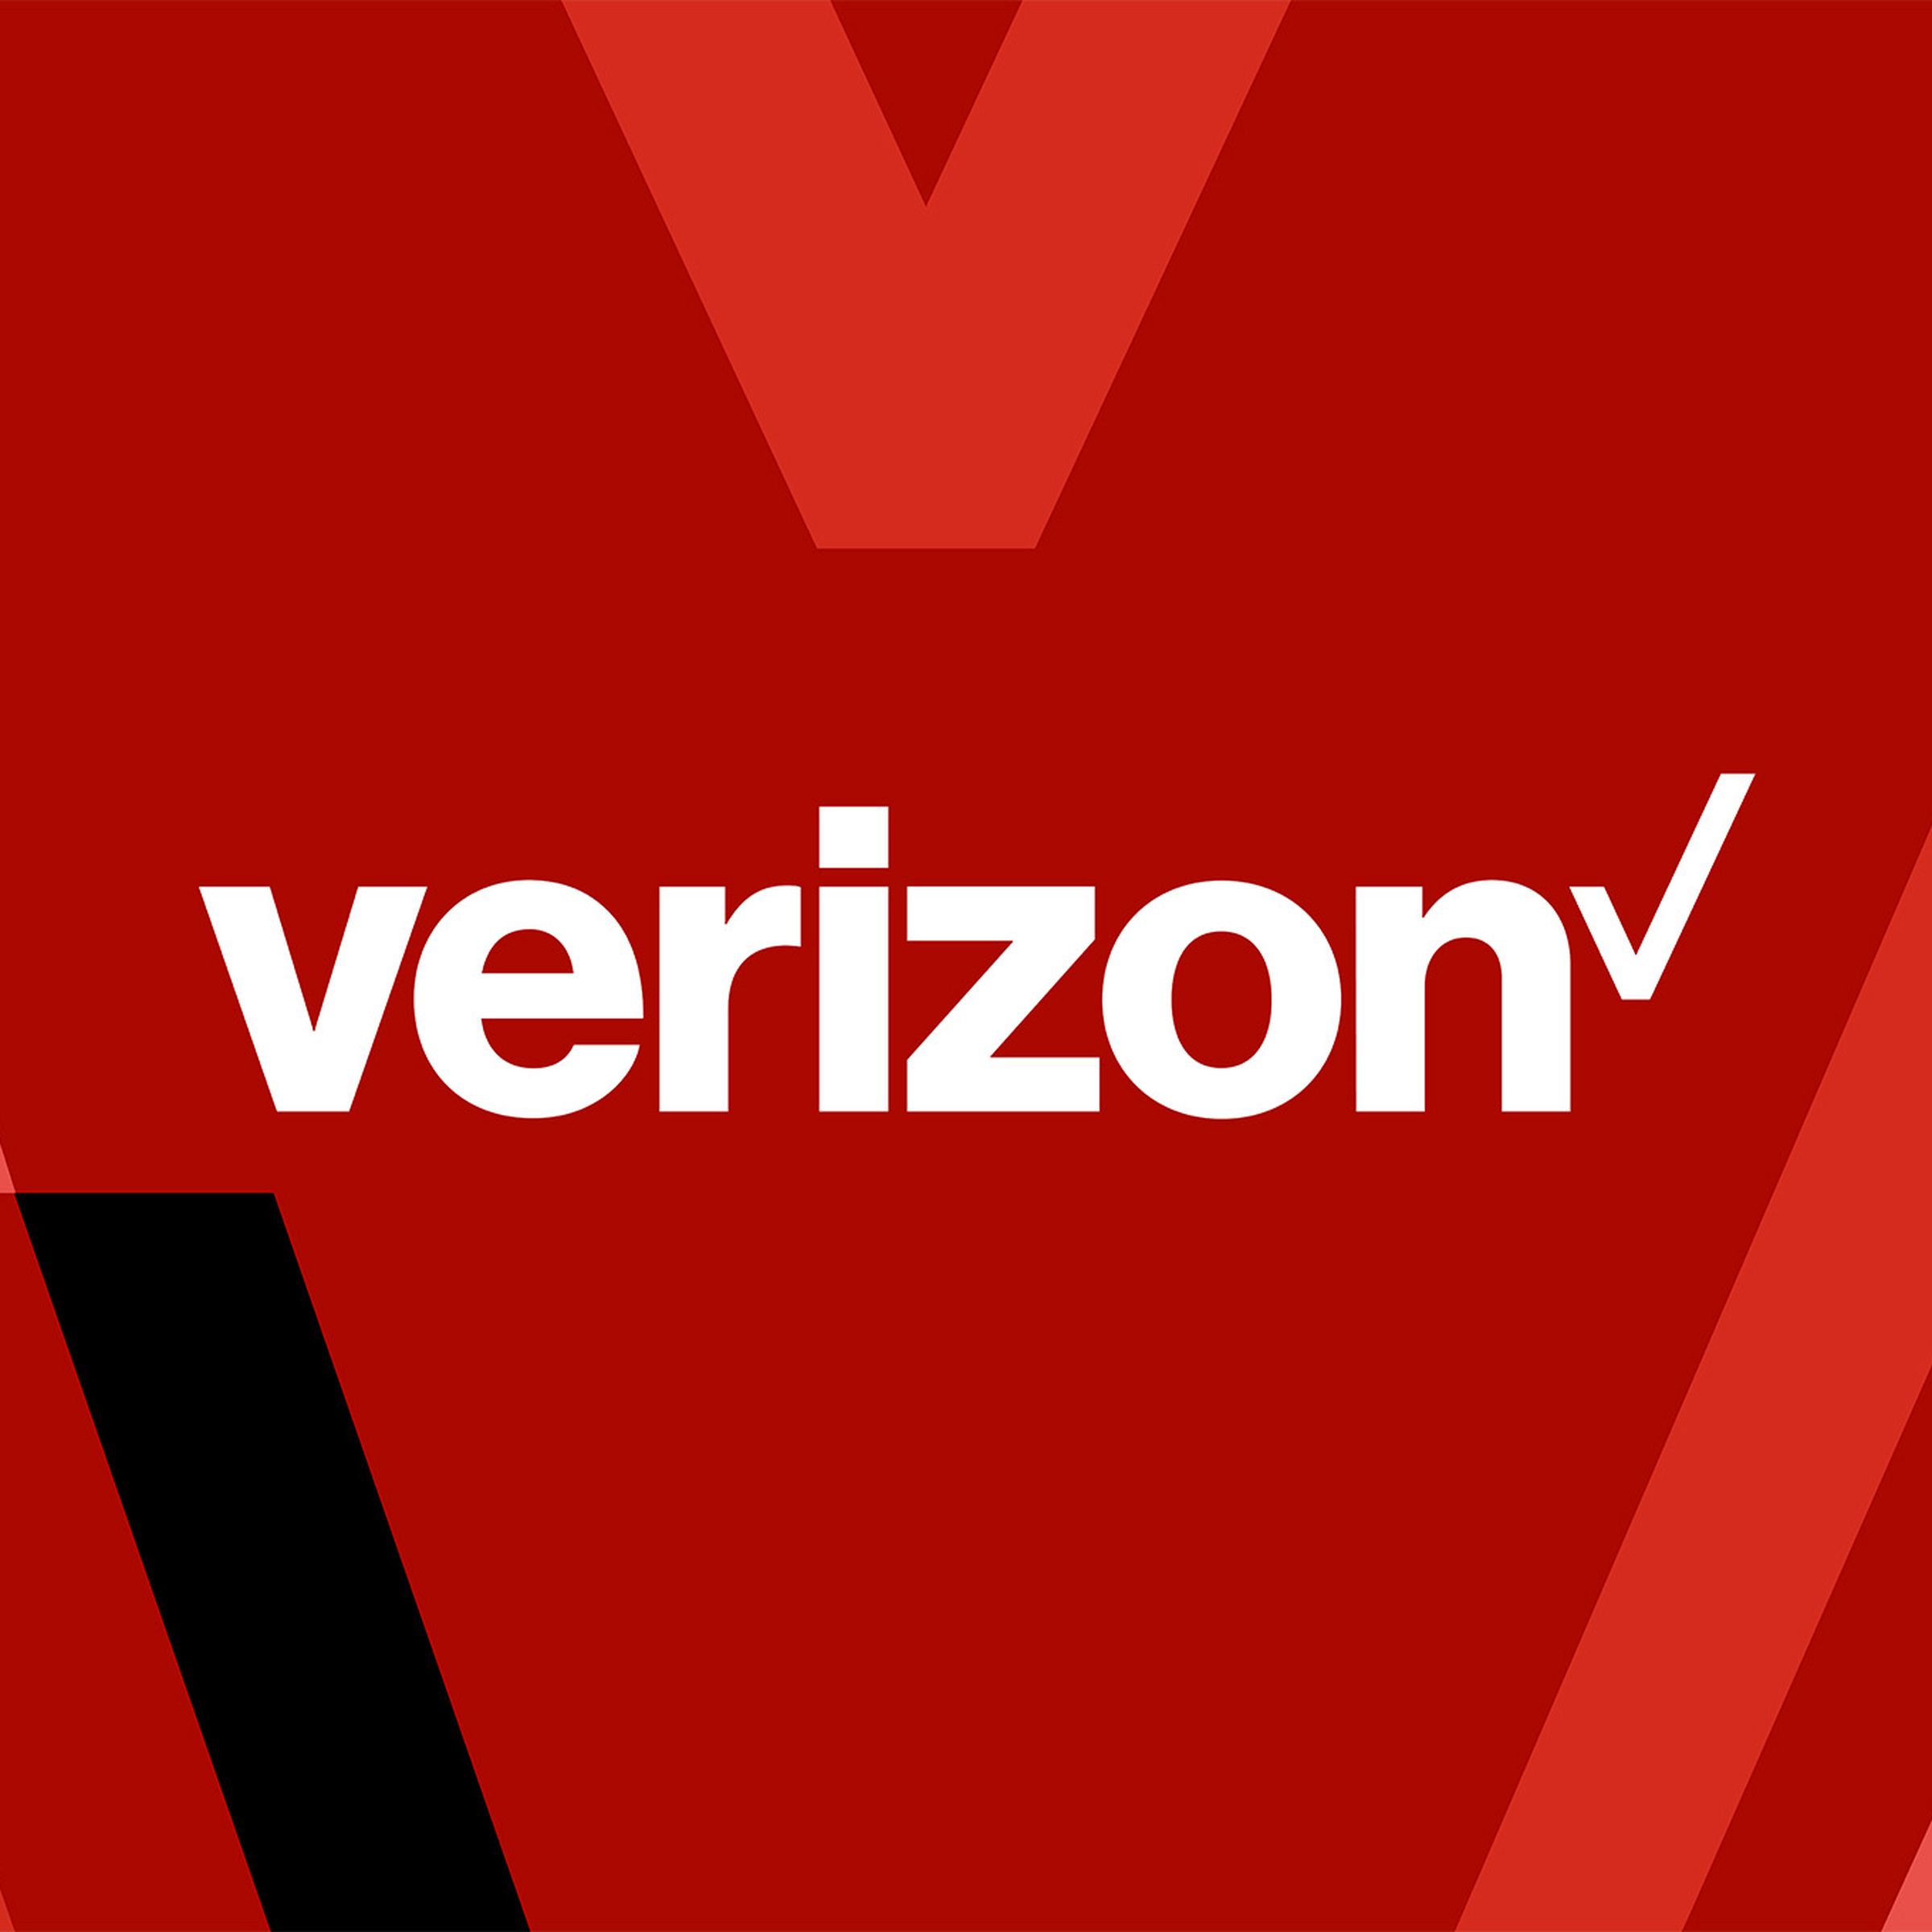 Illustration of the Verizon logo over a red and black background